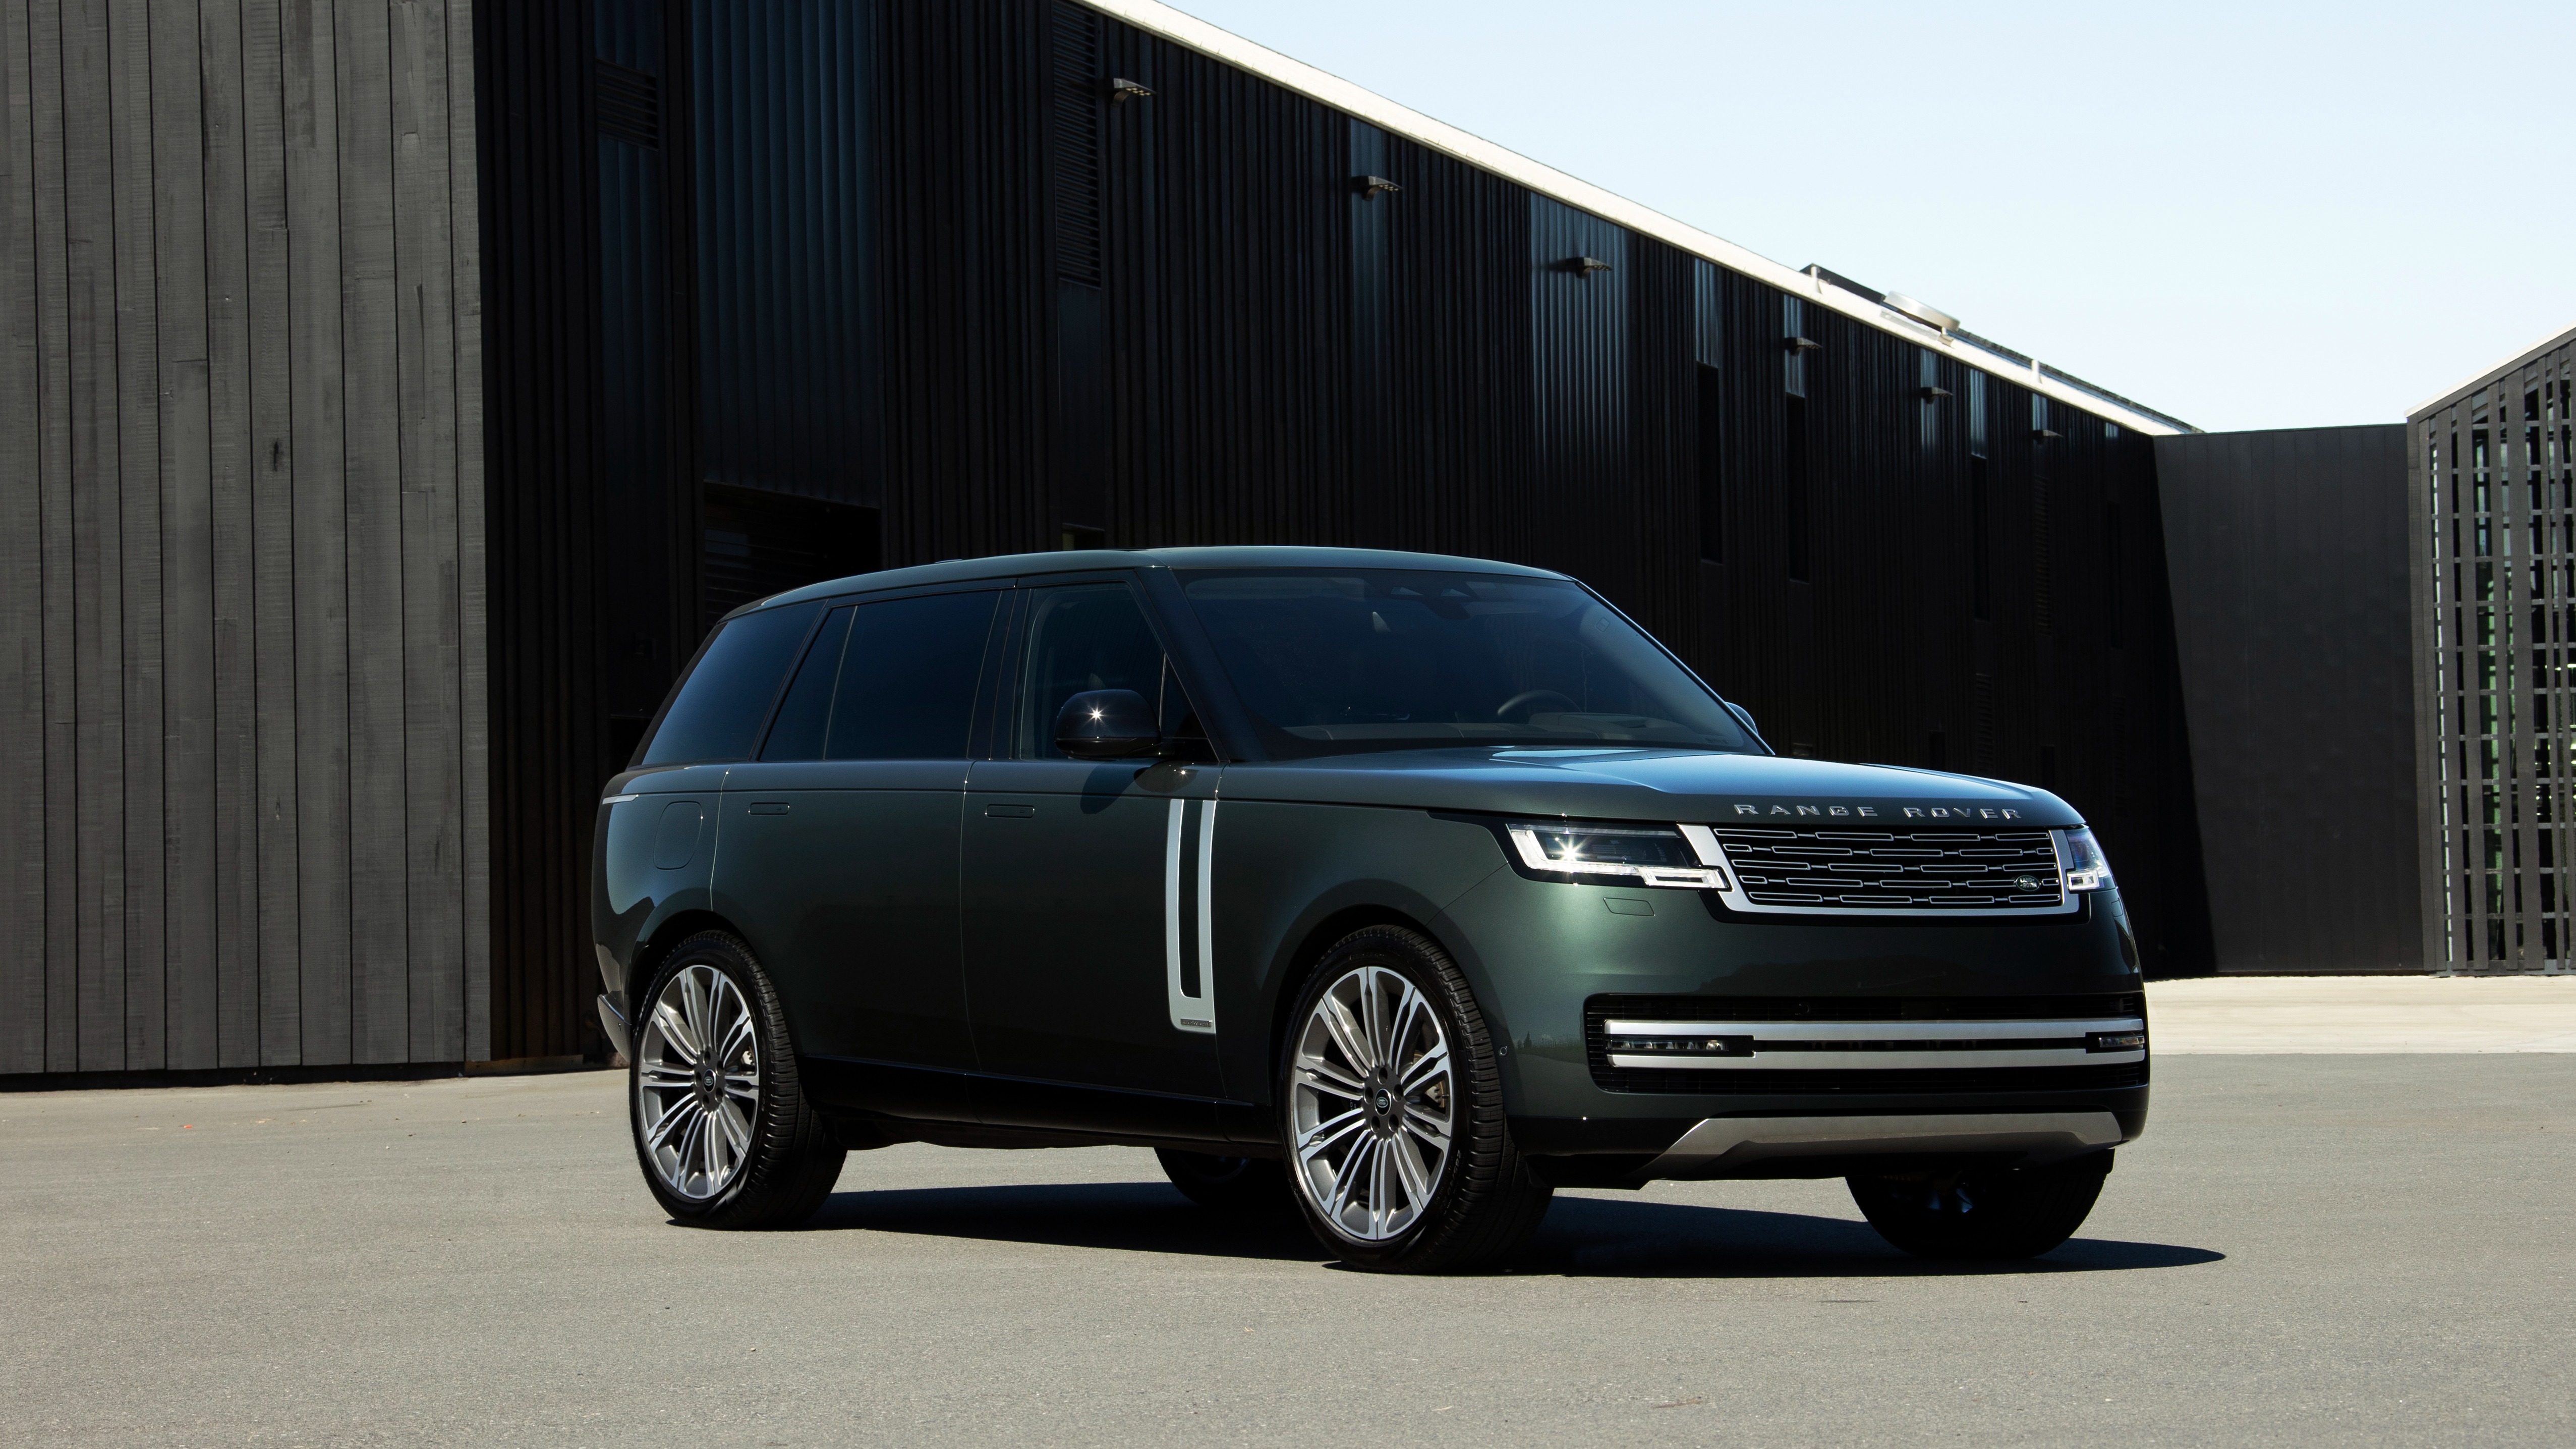 The fifth-generation Range Rover rides out Financial Times